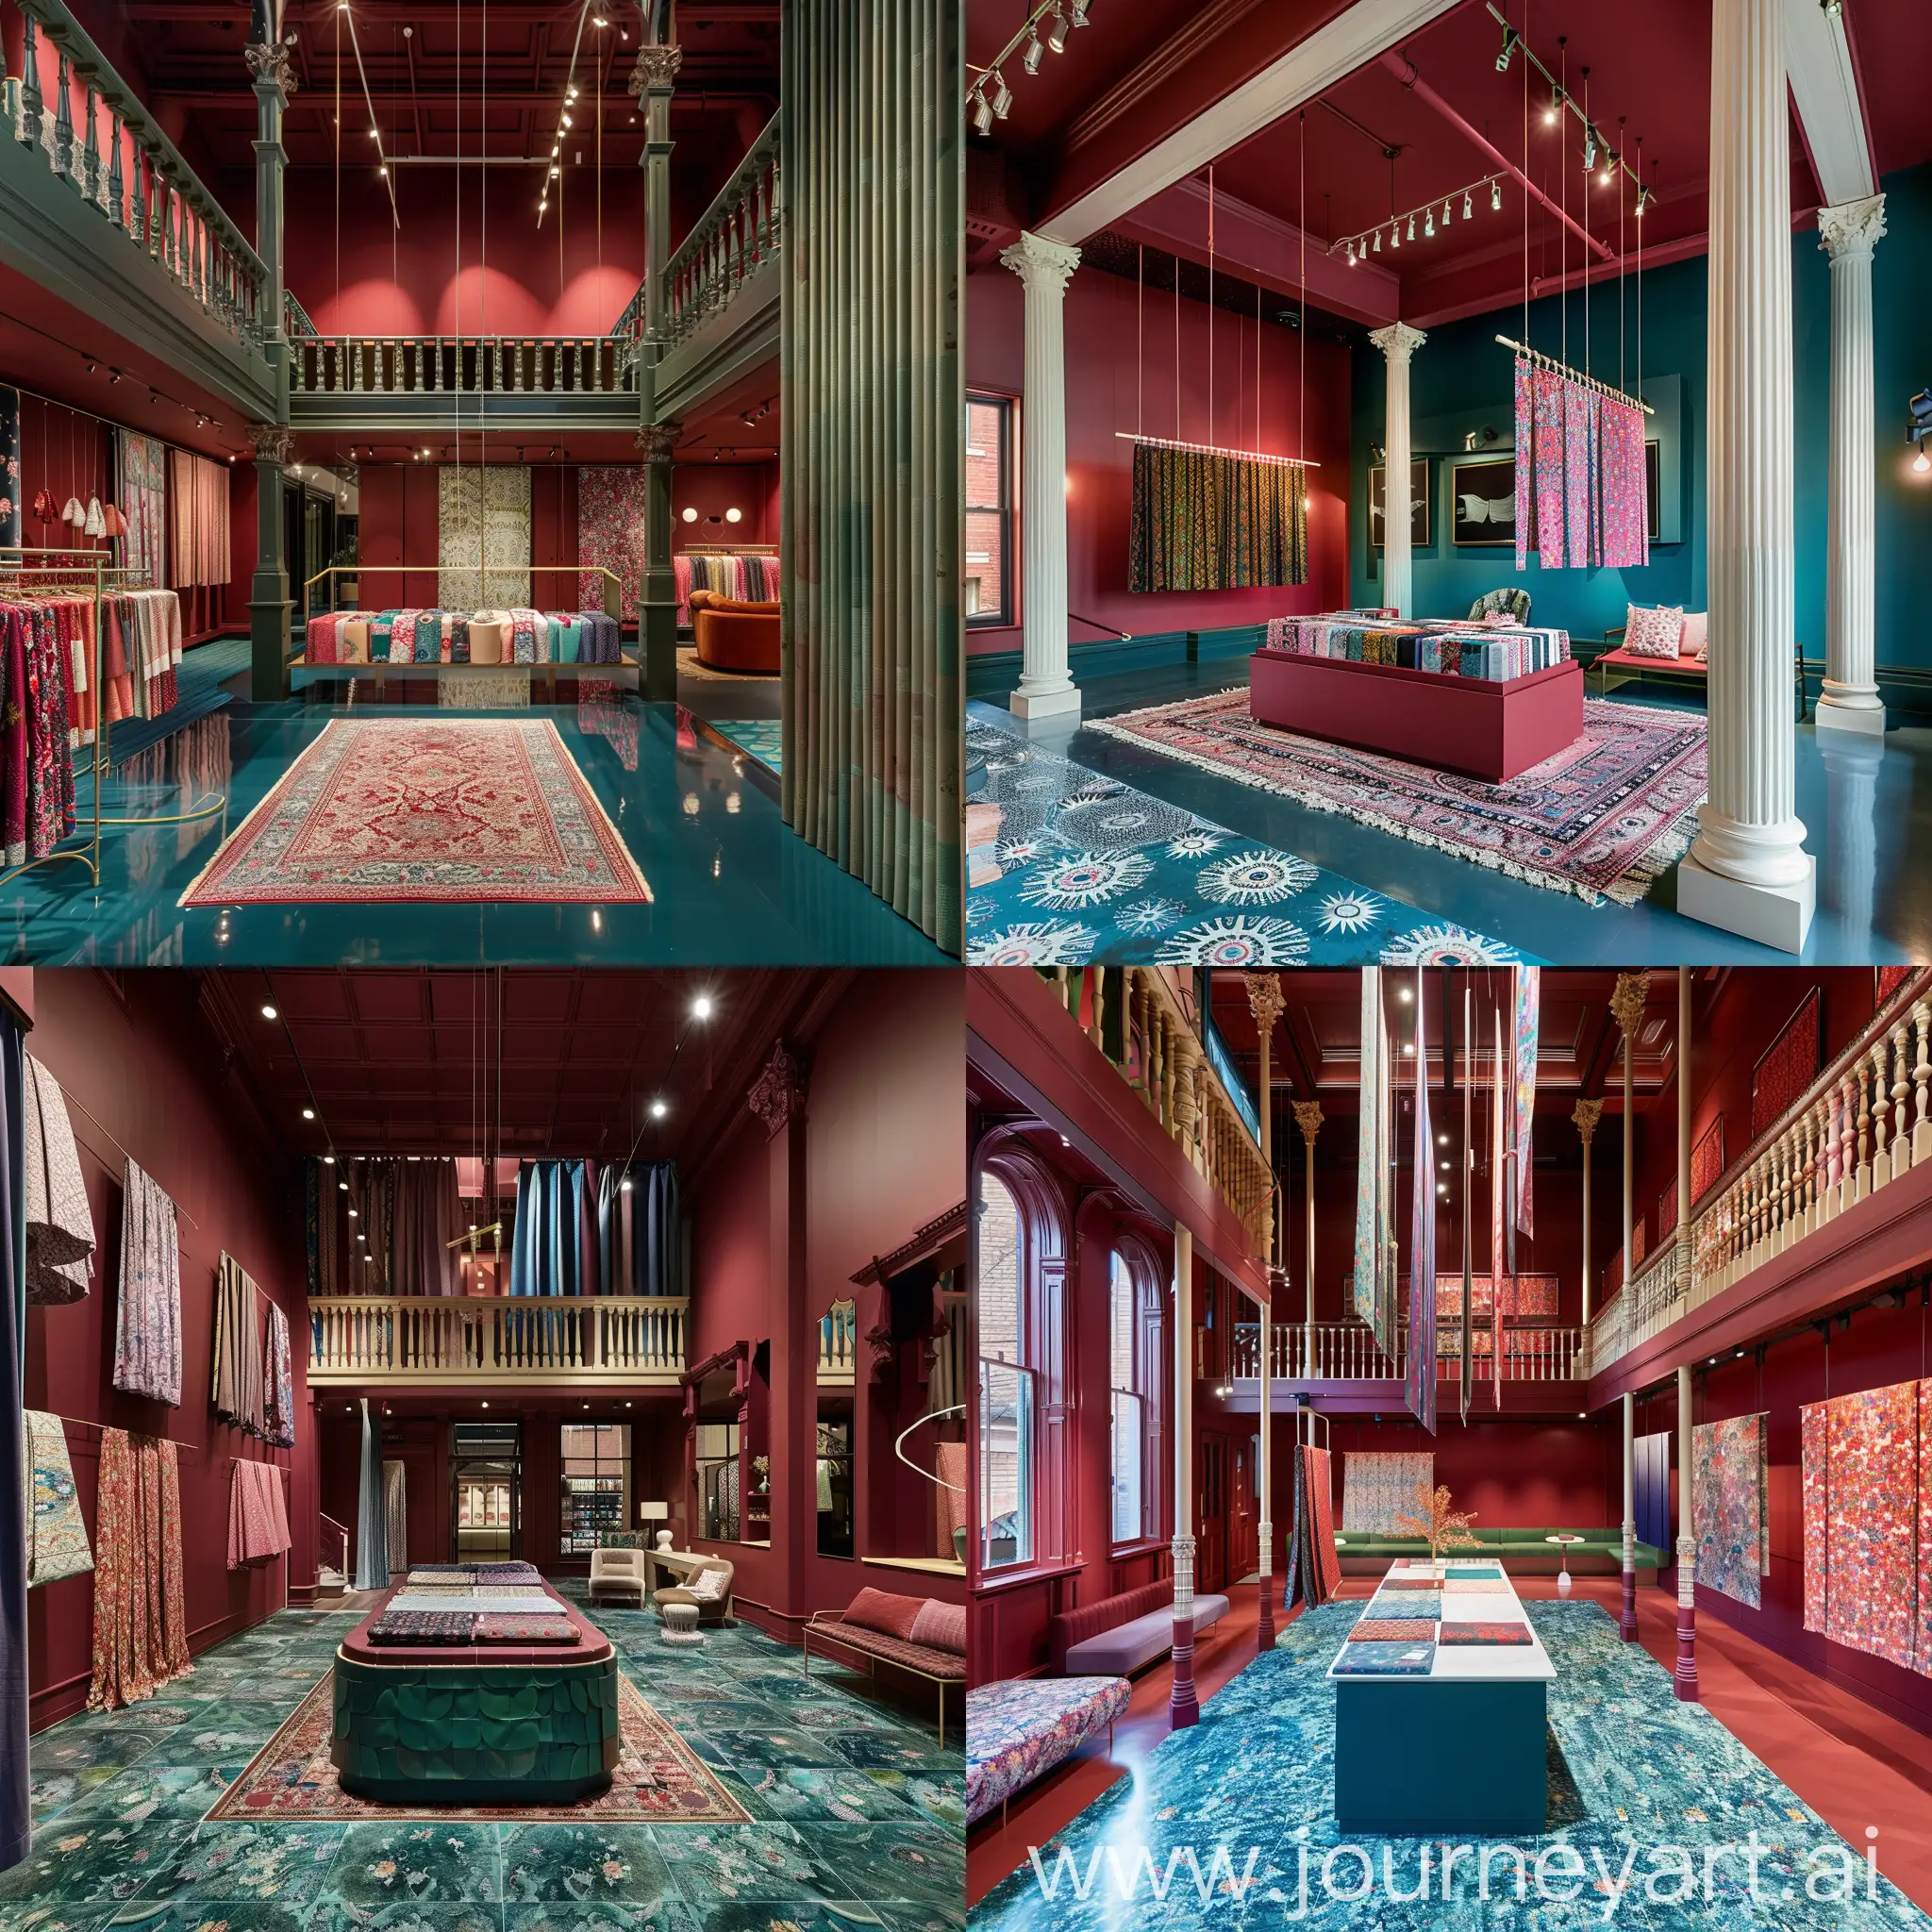 Fabric showroom with an modern interpertation of victorian heritage houses with baluster details, an oxblood red wall and ceiling and rookwood blue green flooring, an integrated hanging fabric display, fabric display island in the middle of the space and a seating area in the space.